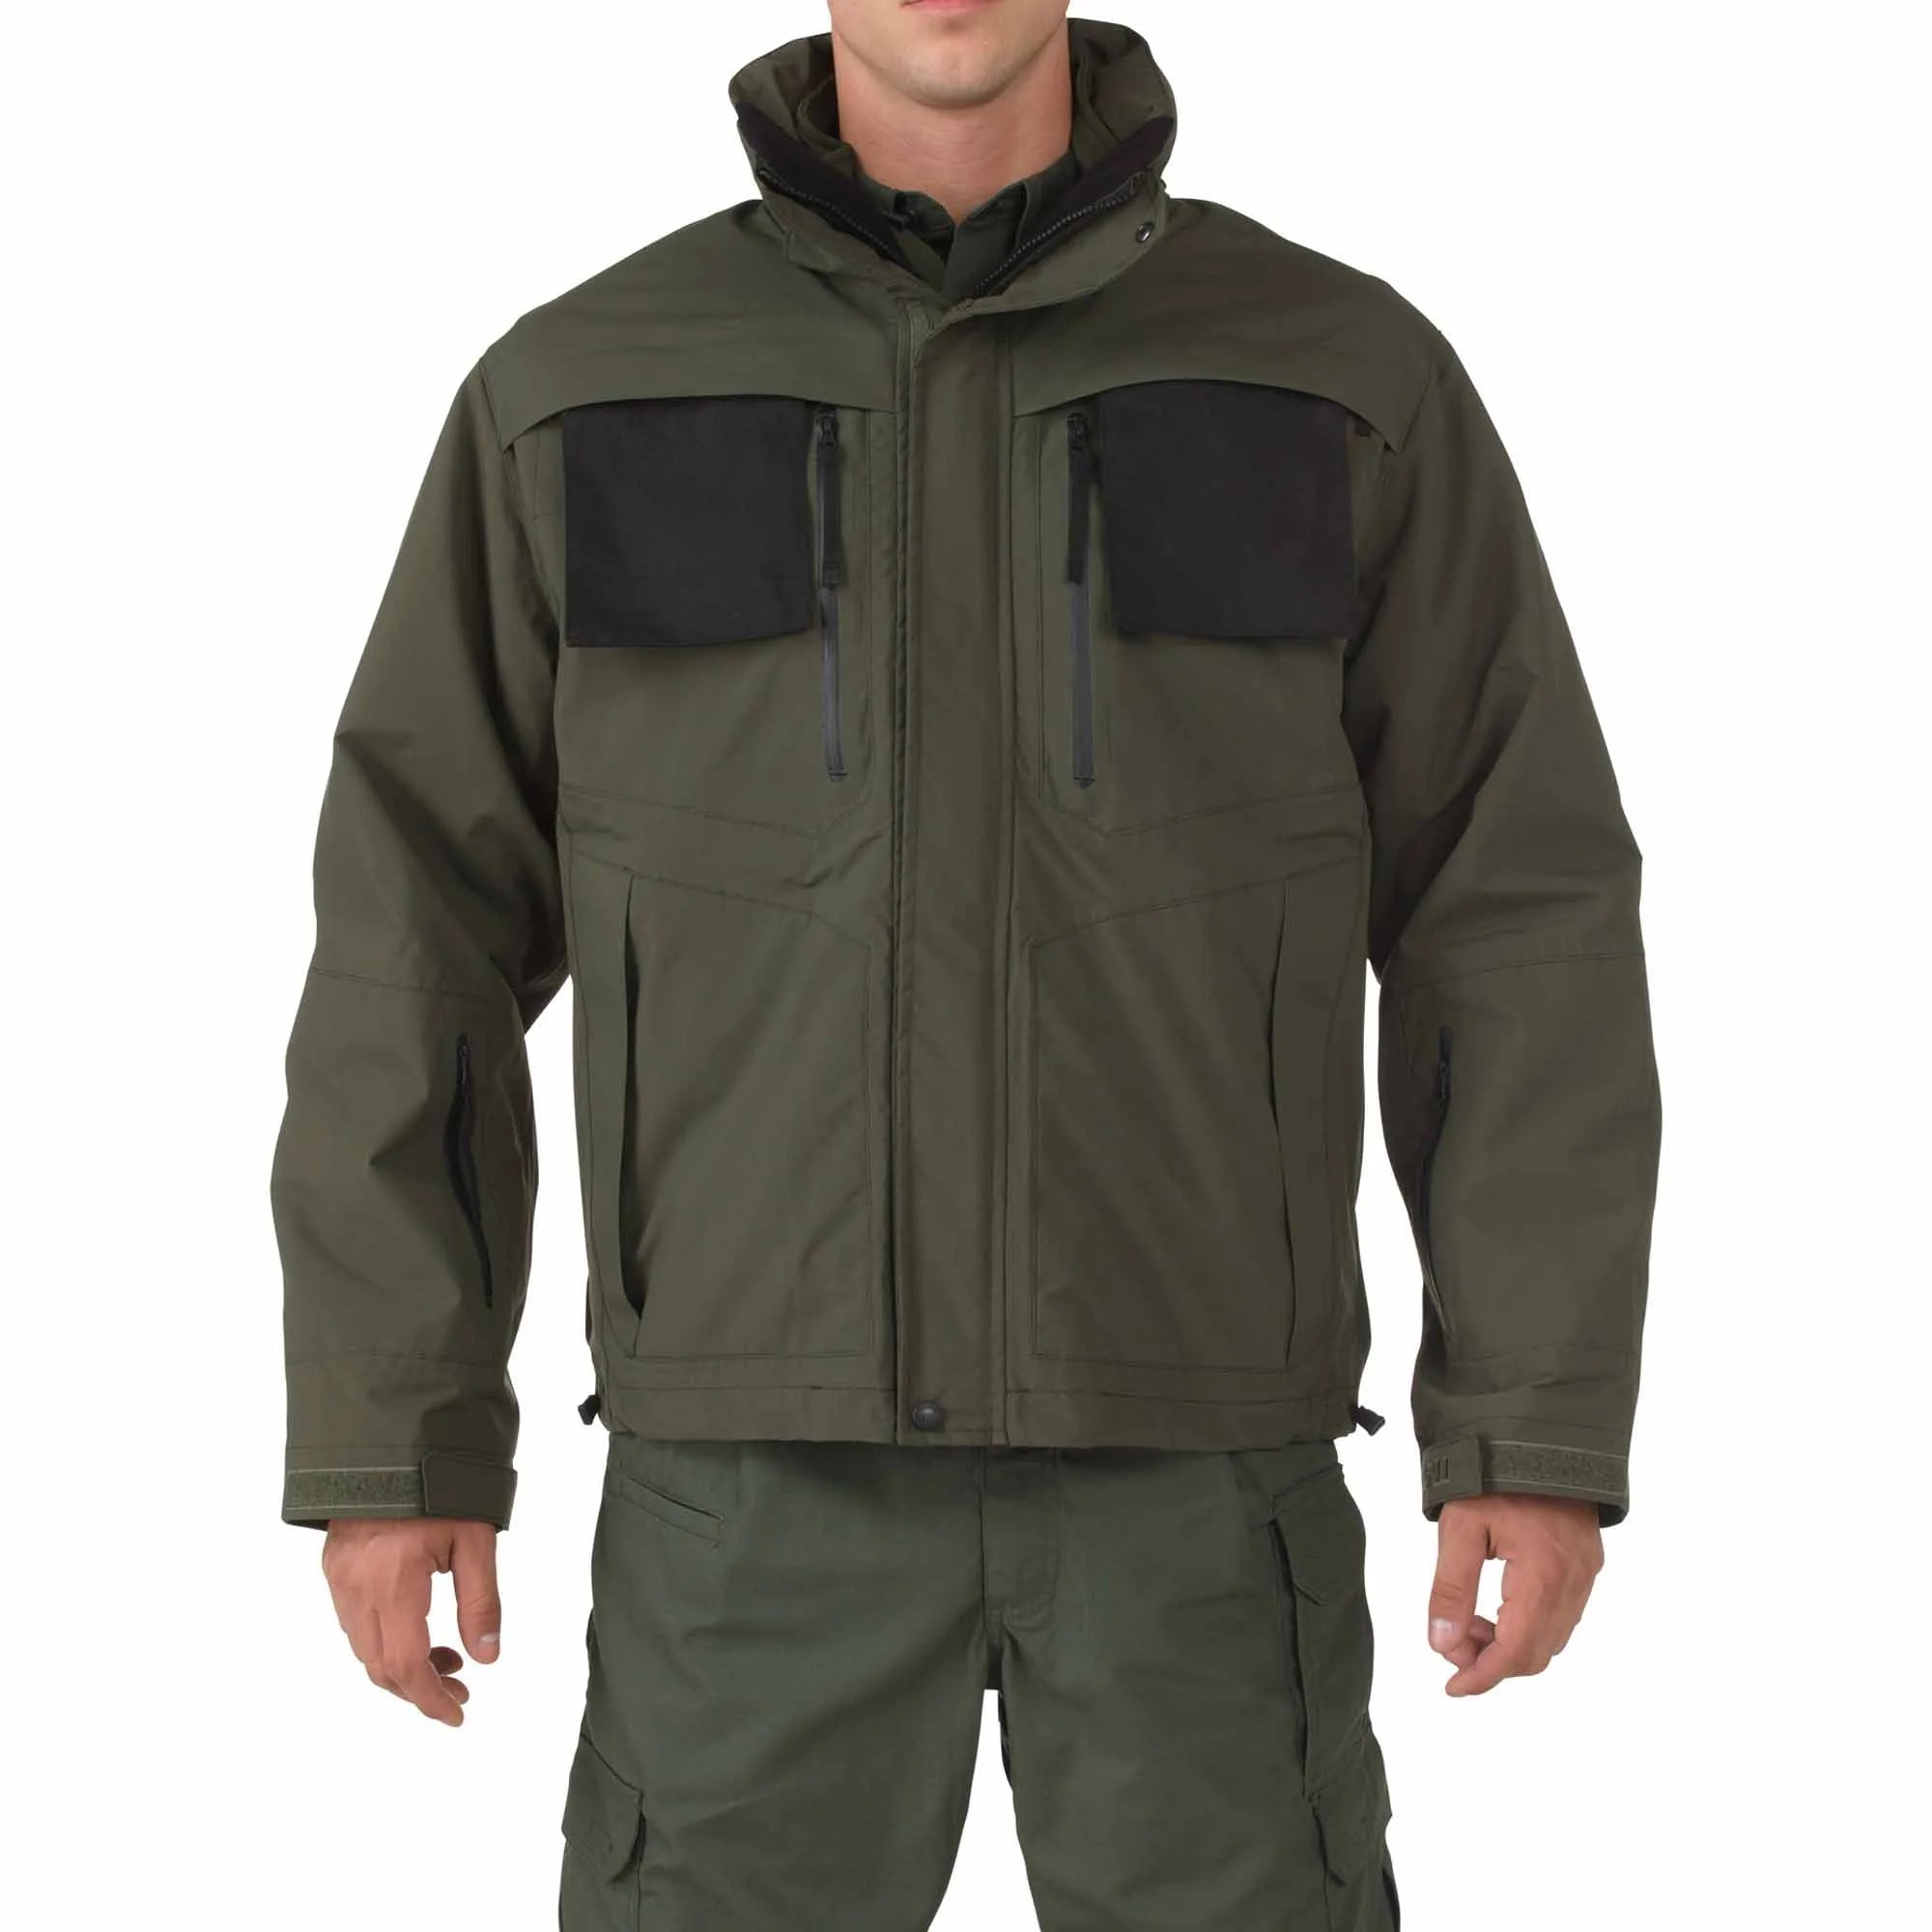 5.11 Tactical Valiant Police Duty Jacket 48153 - Clothing & Accessories